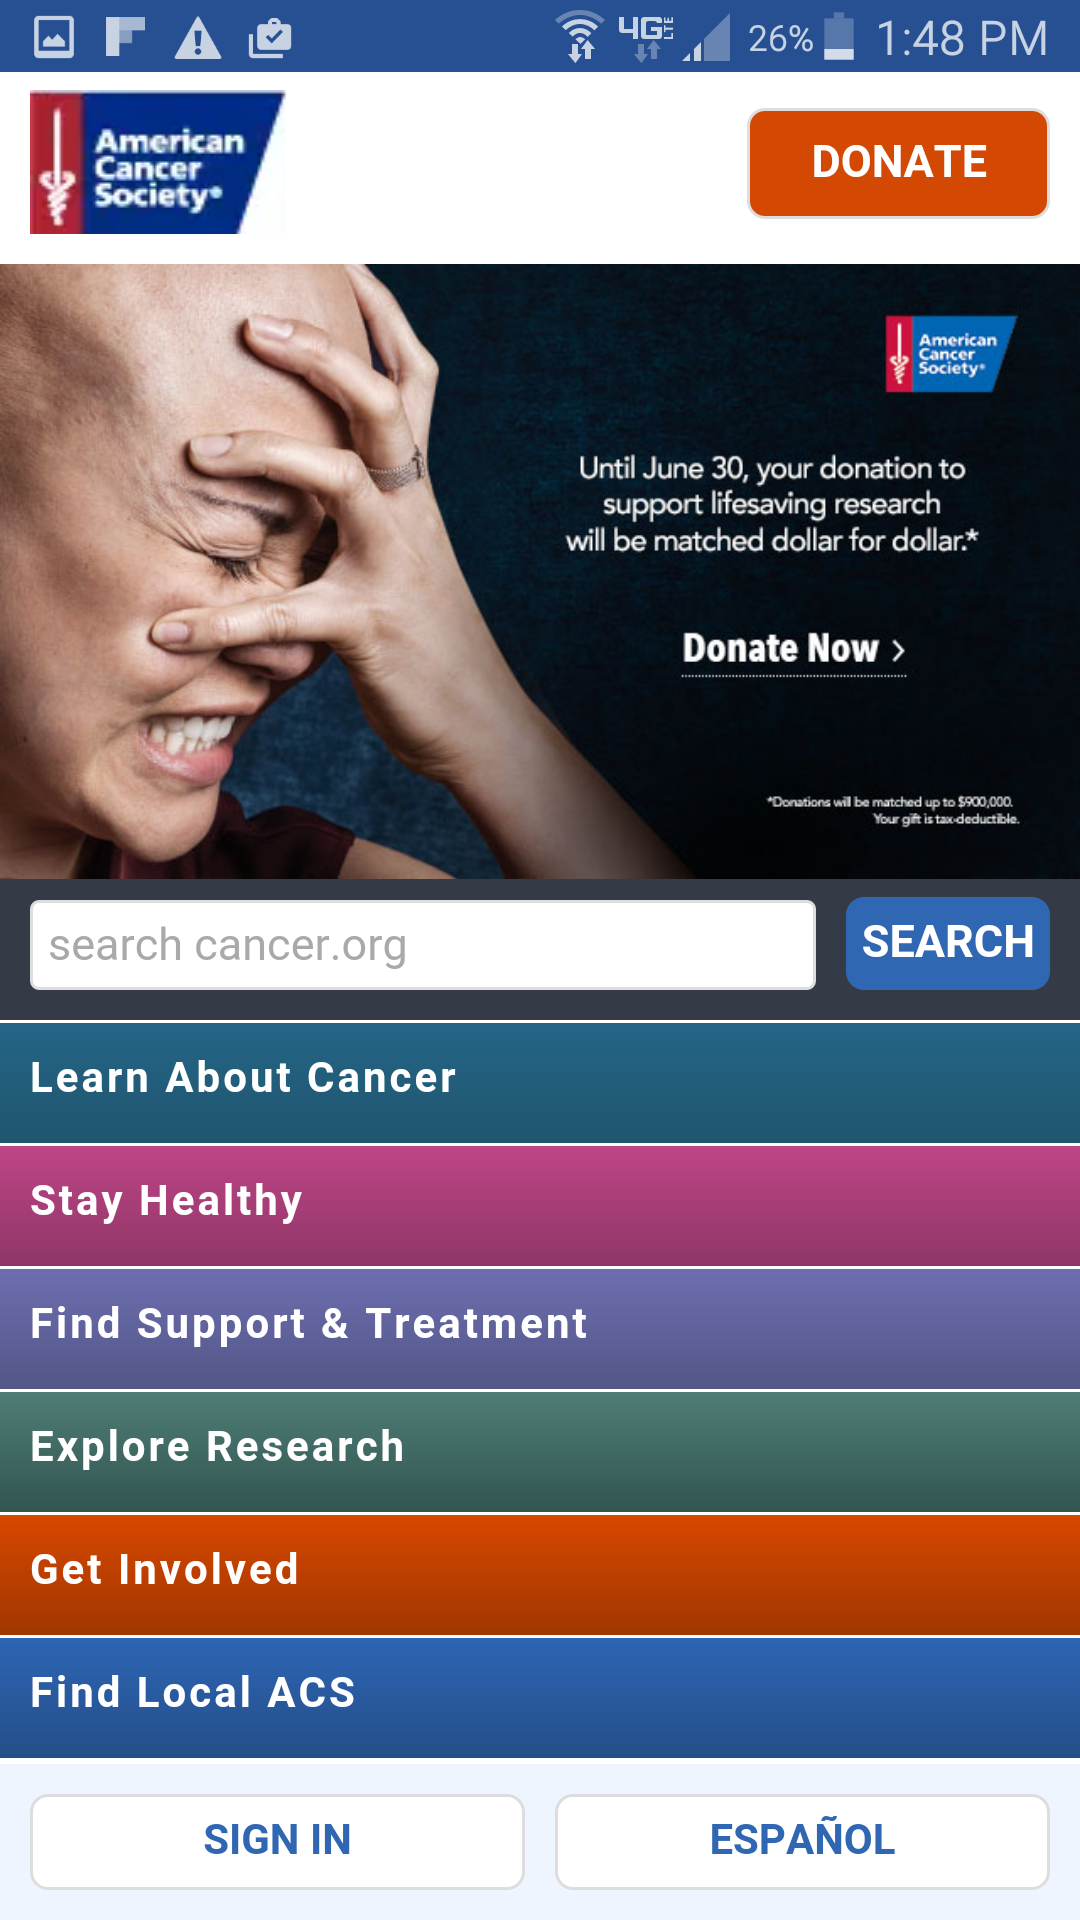 American Cancer Society Mobile Website